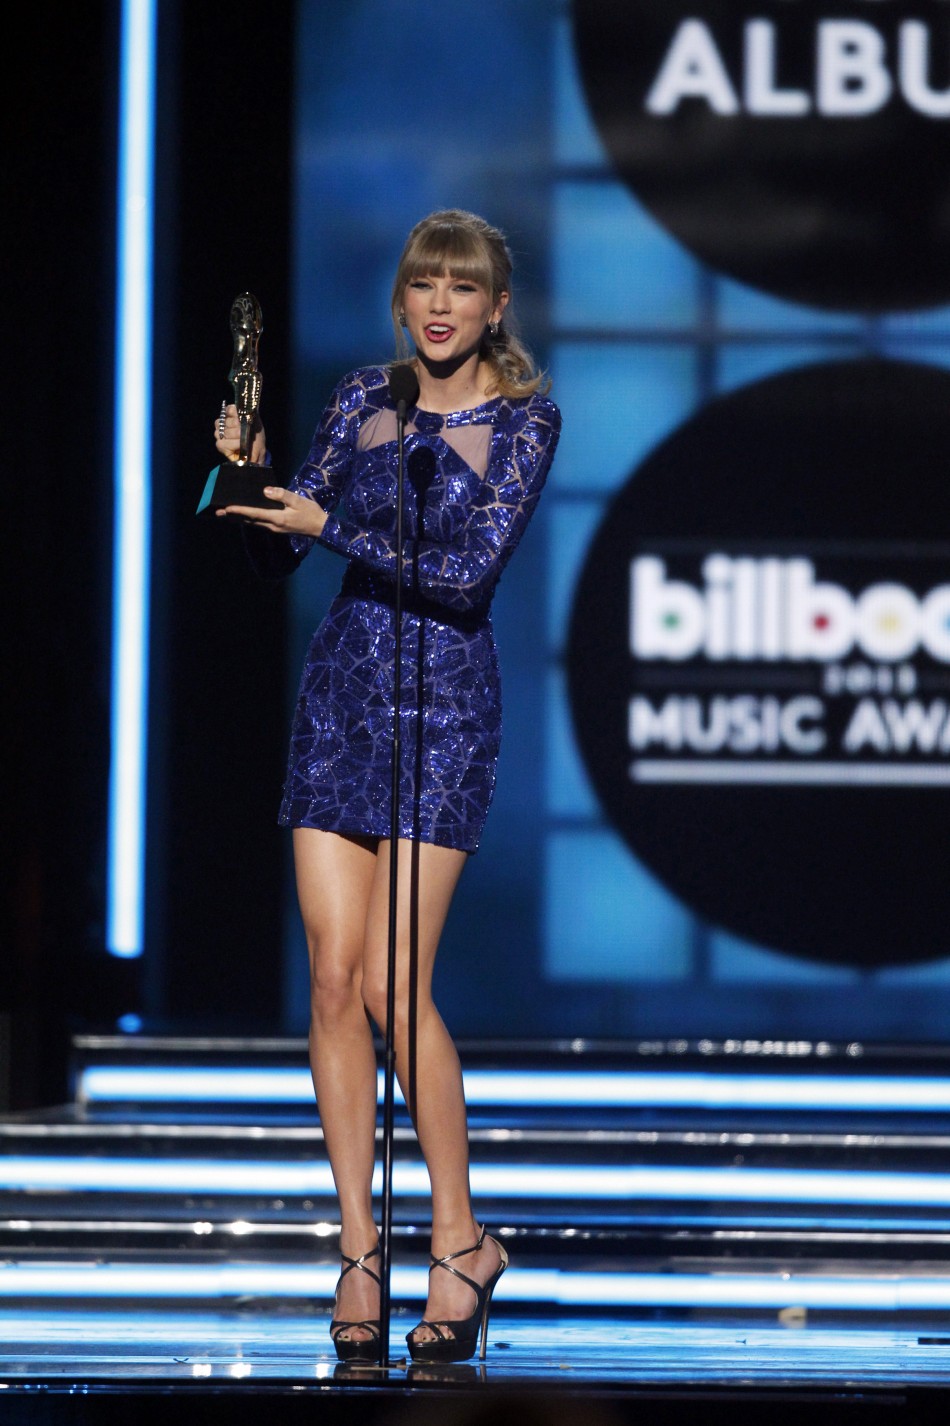 Singer Taylor Swift accepts the award for Top Billboard 200 Album during the Billboard Music Awards at the MGM Grand Garden Arena in Las Vegas, Nevada May 19, 2013.